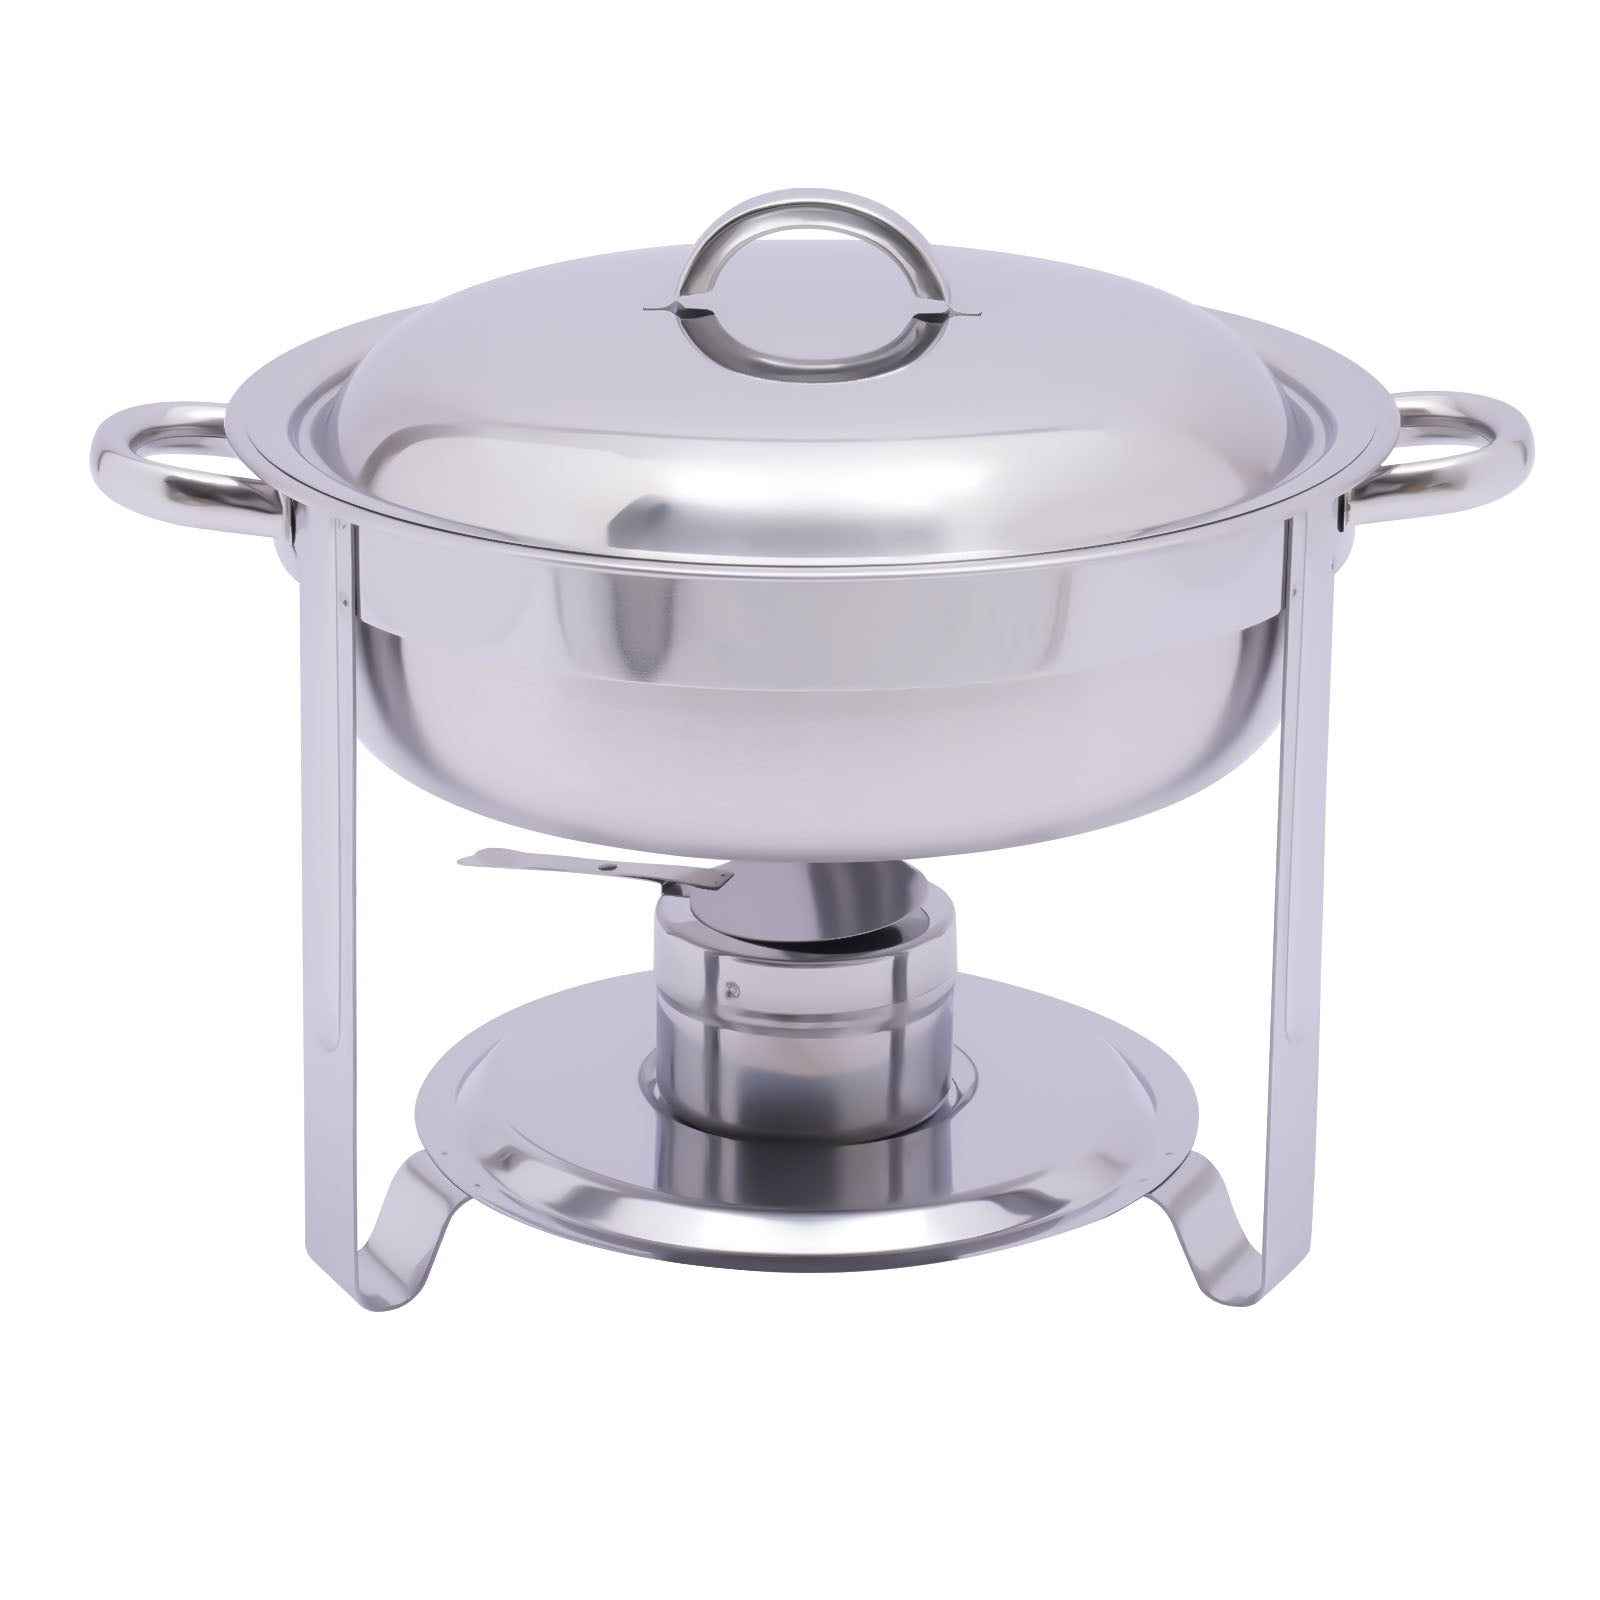 Chafing Dish Chafer rond en acier inoxydable